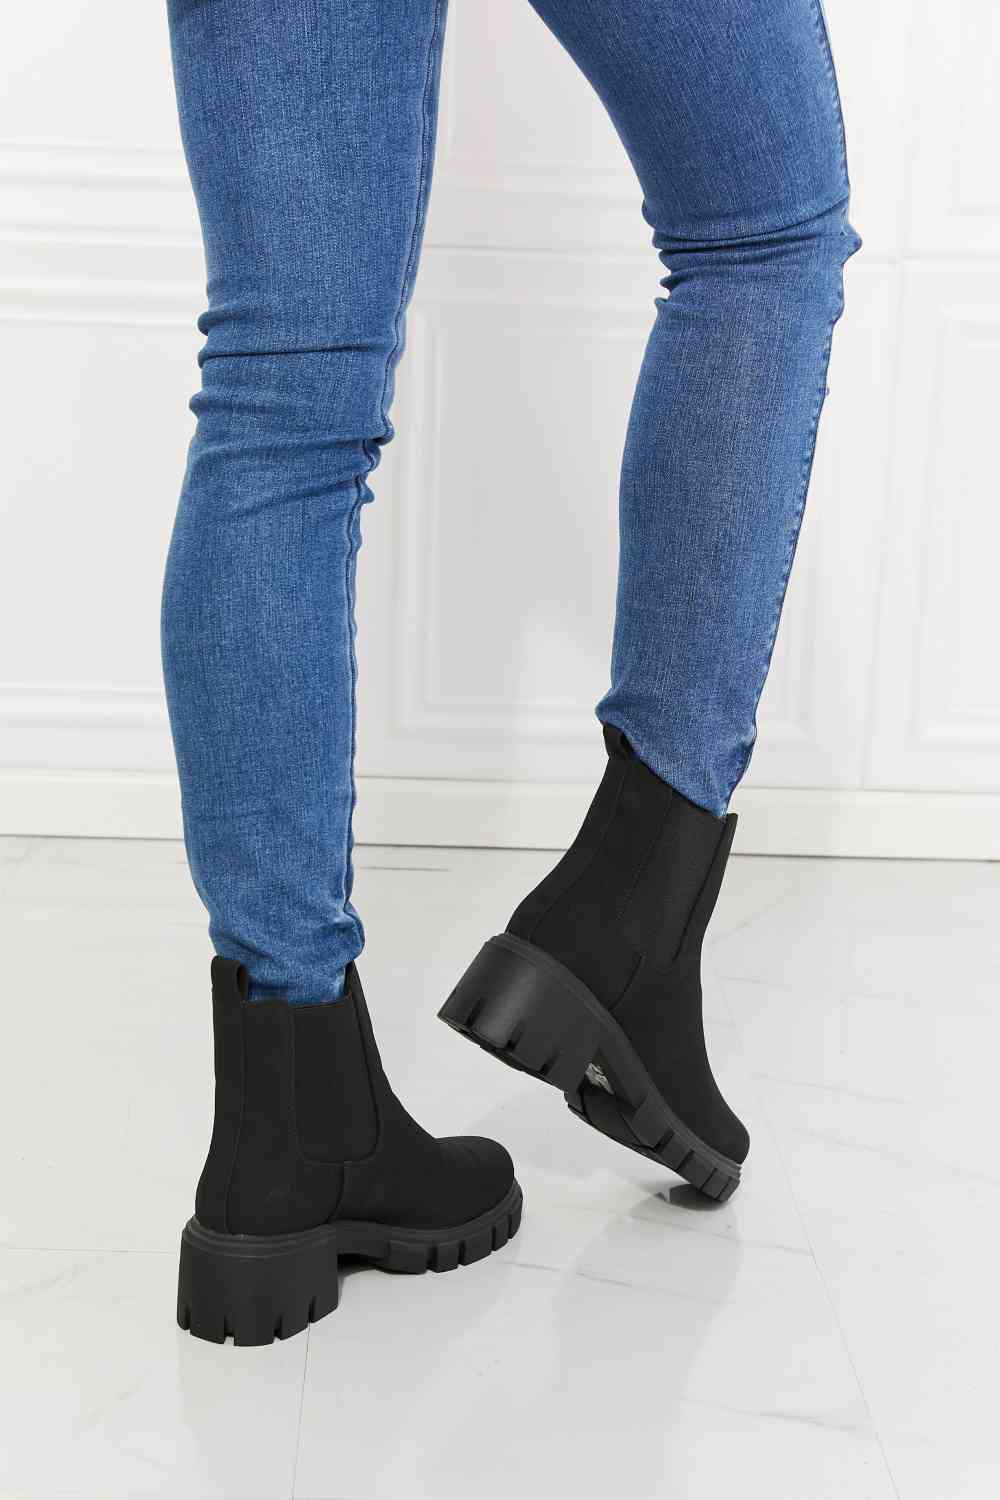 MMShoes Chelsea Boots in Black